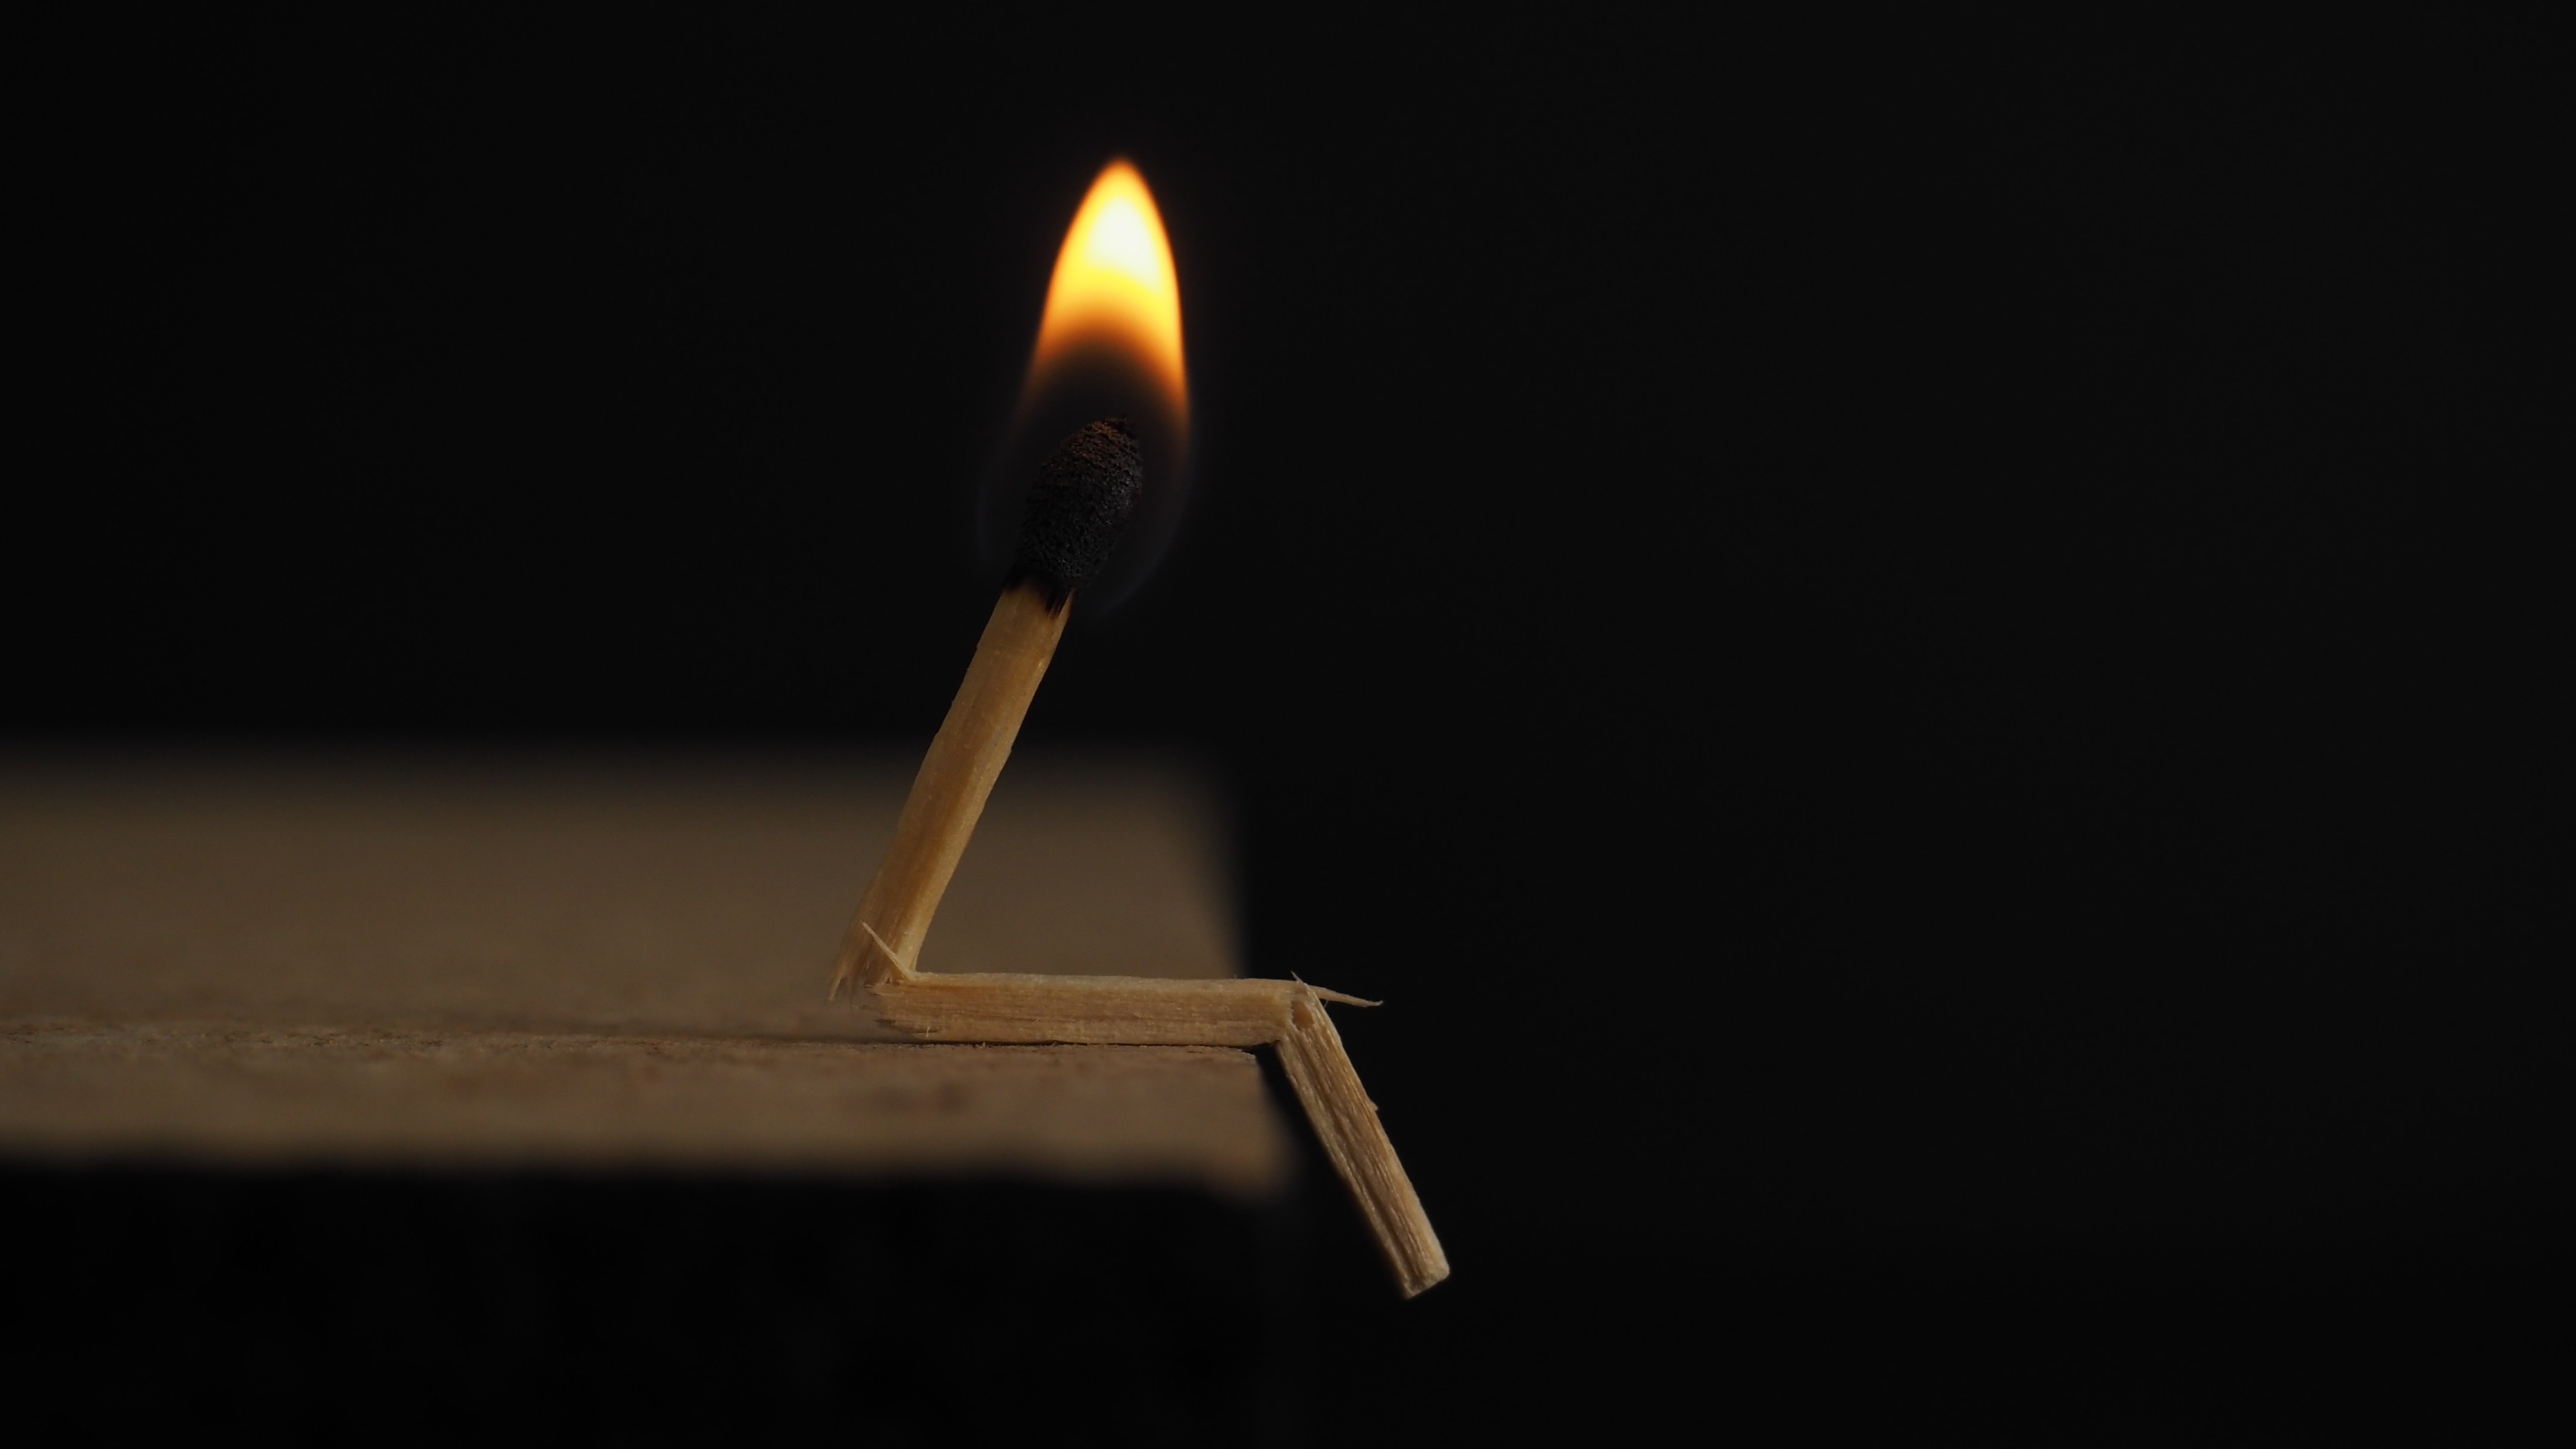 Lighted matchstick on brown wooden surface photo